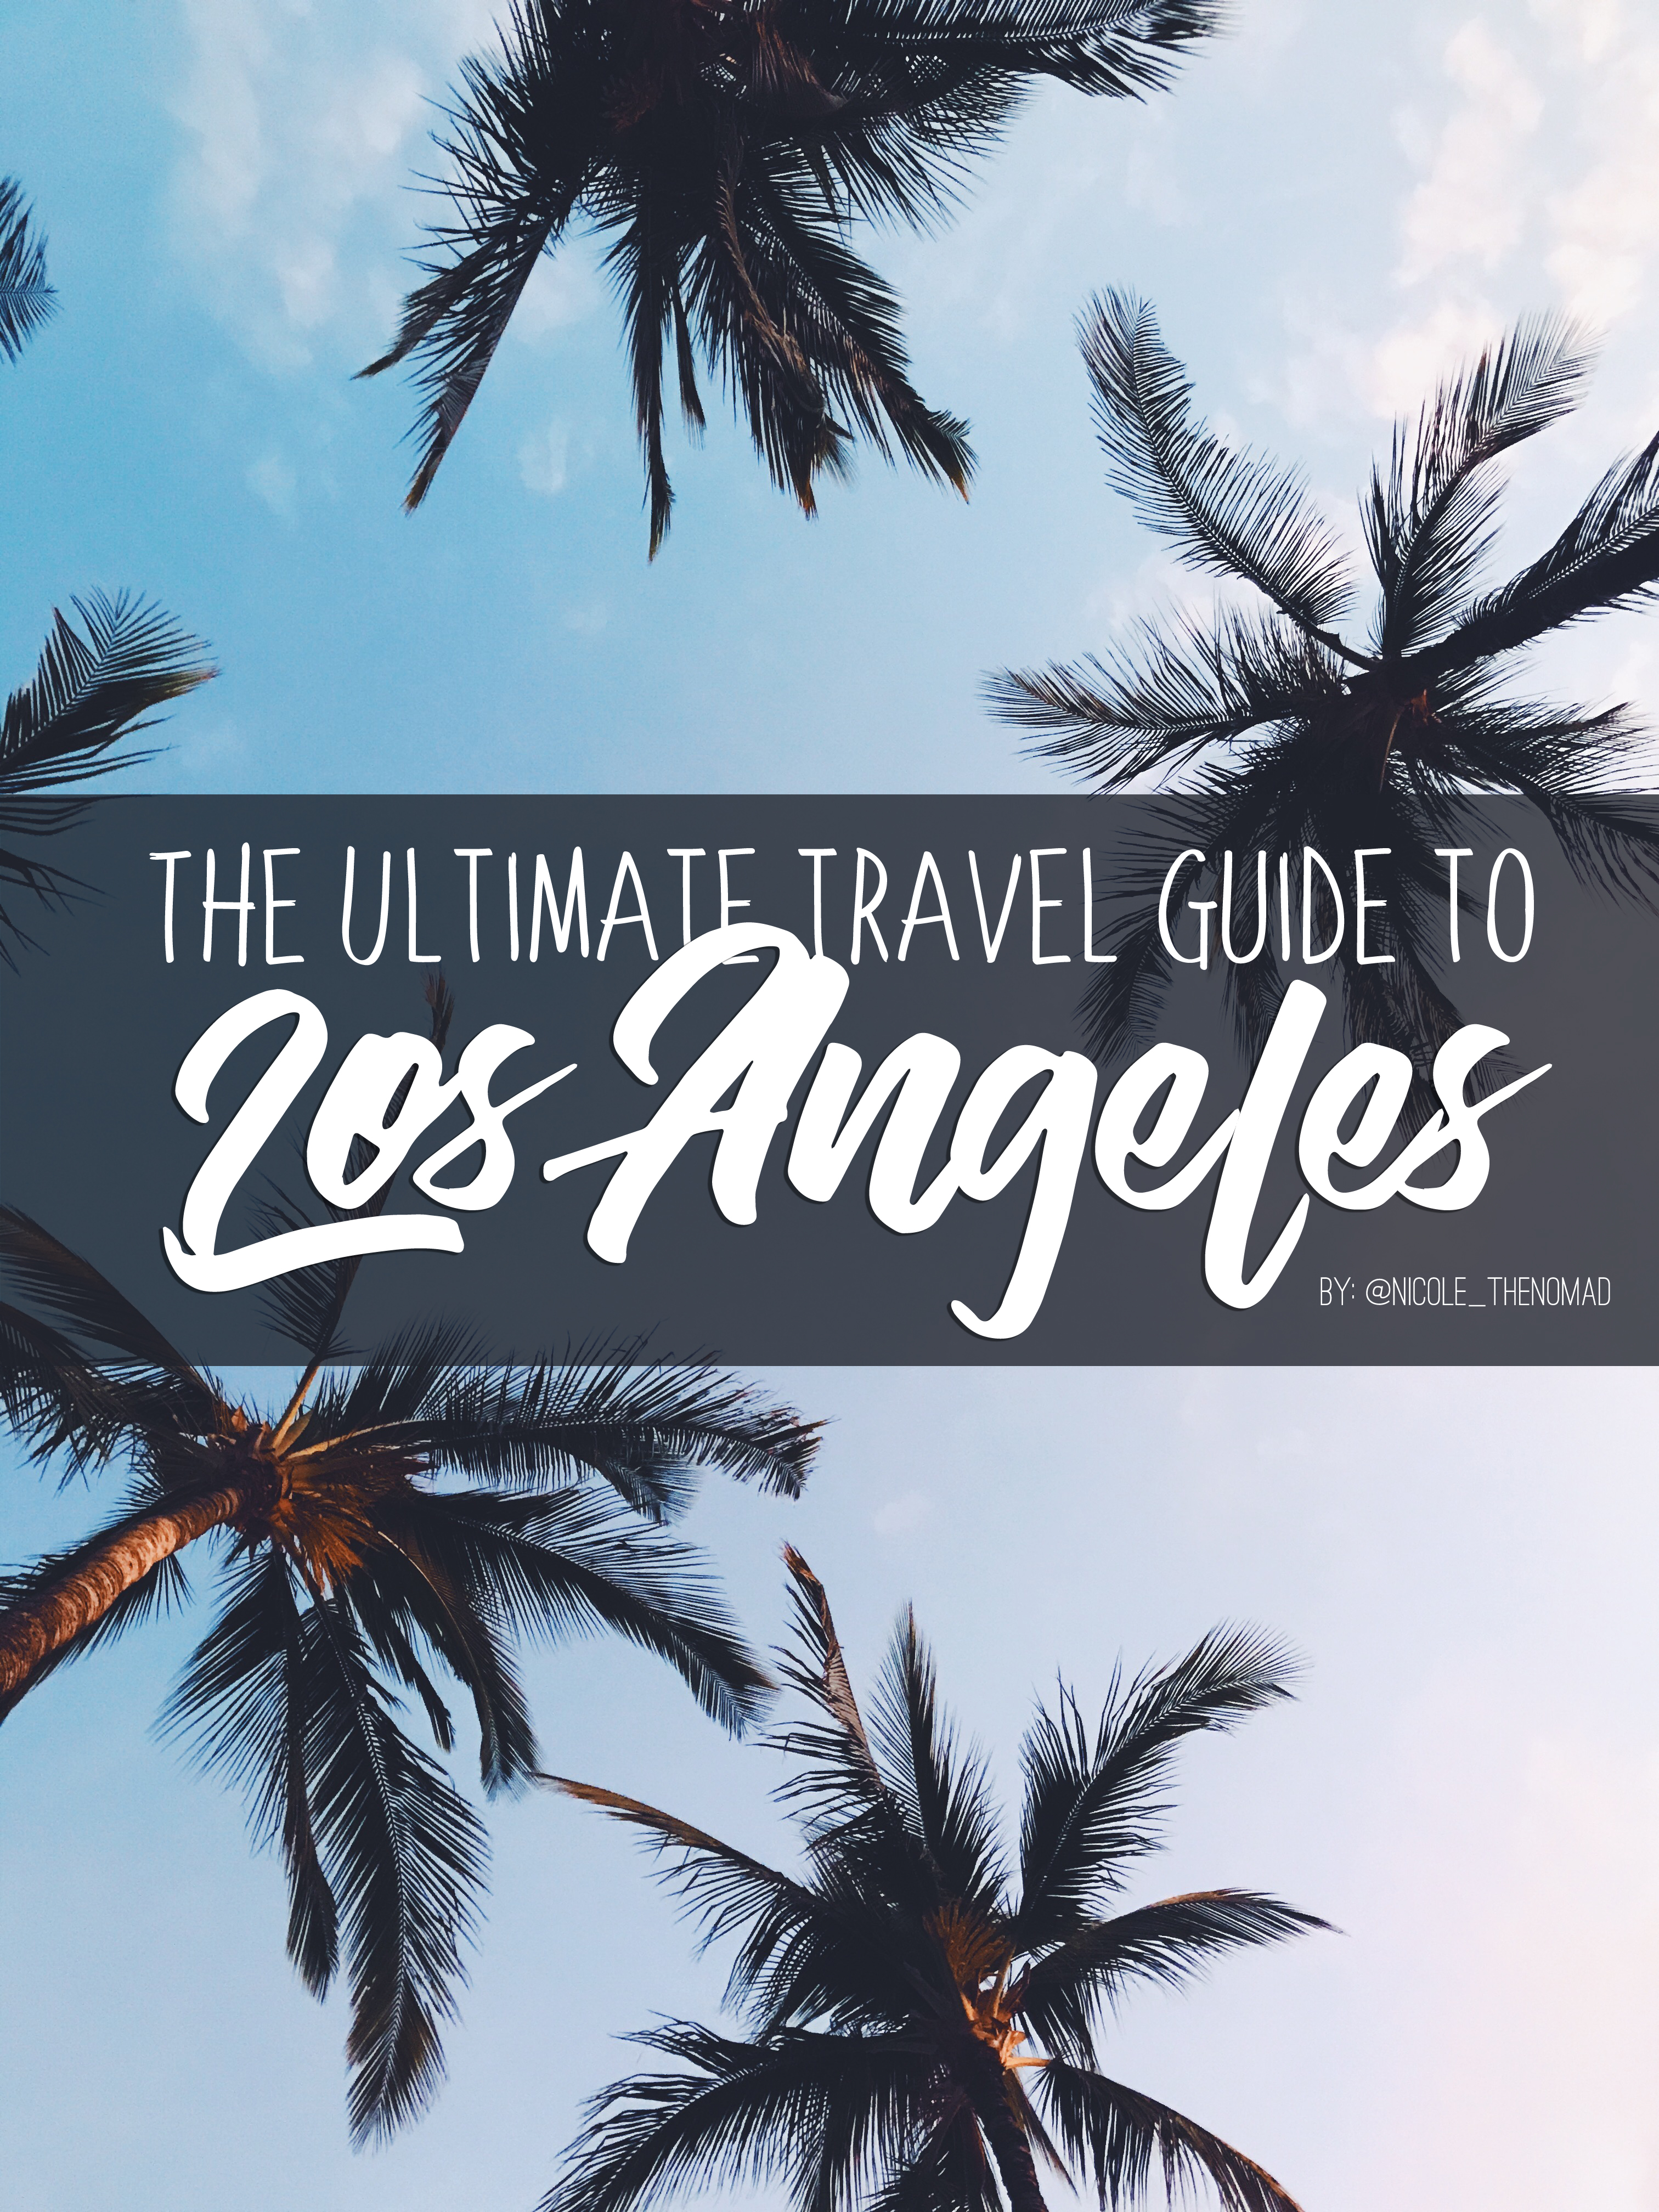 The Ultimate Travel Guide to Los Angeles